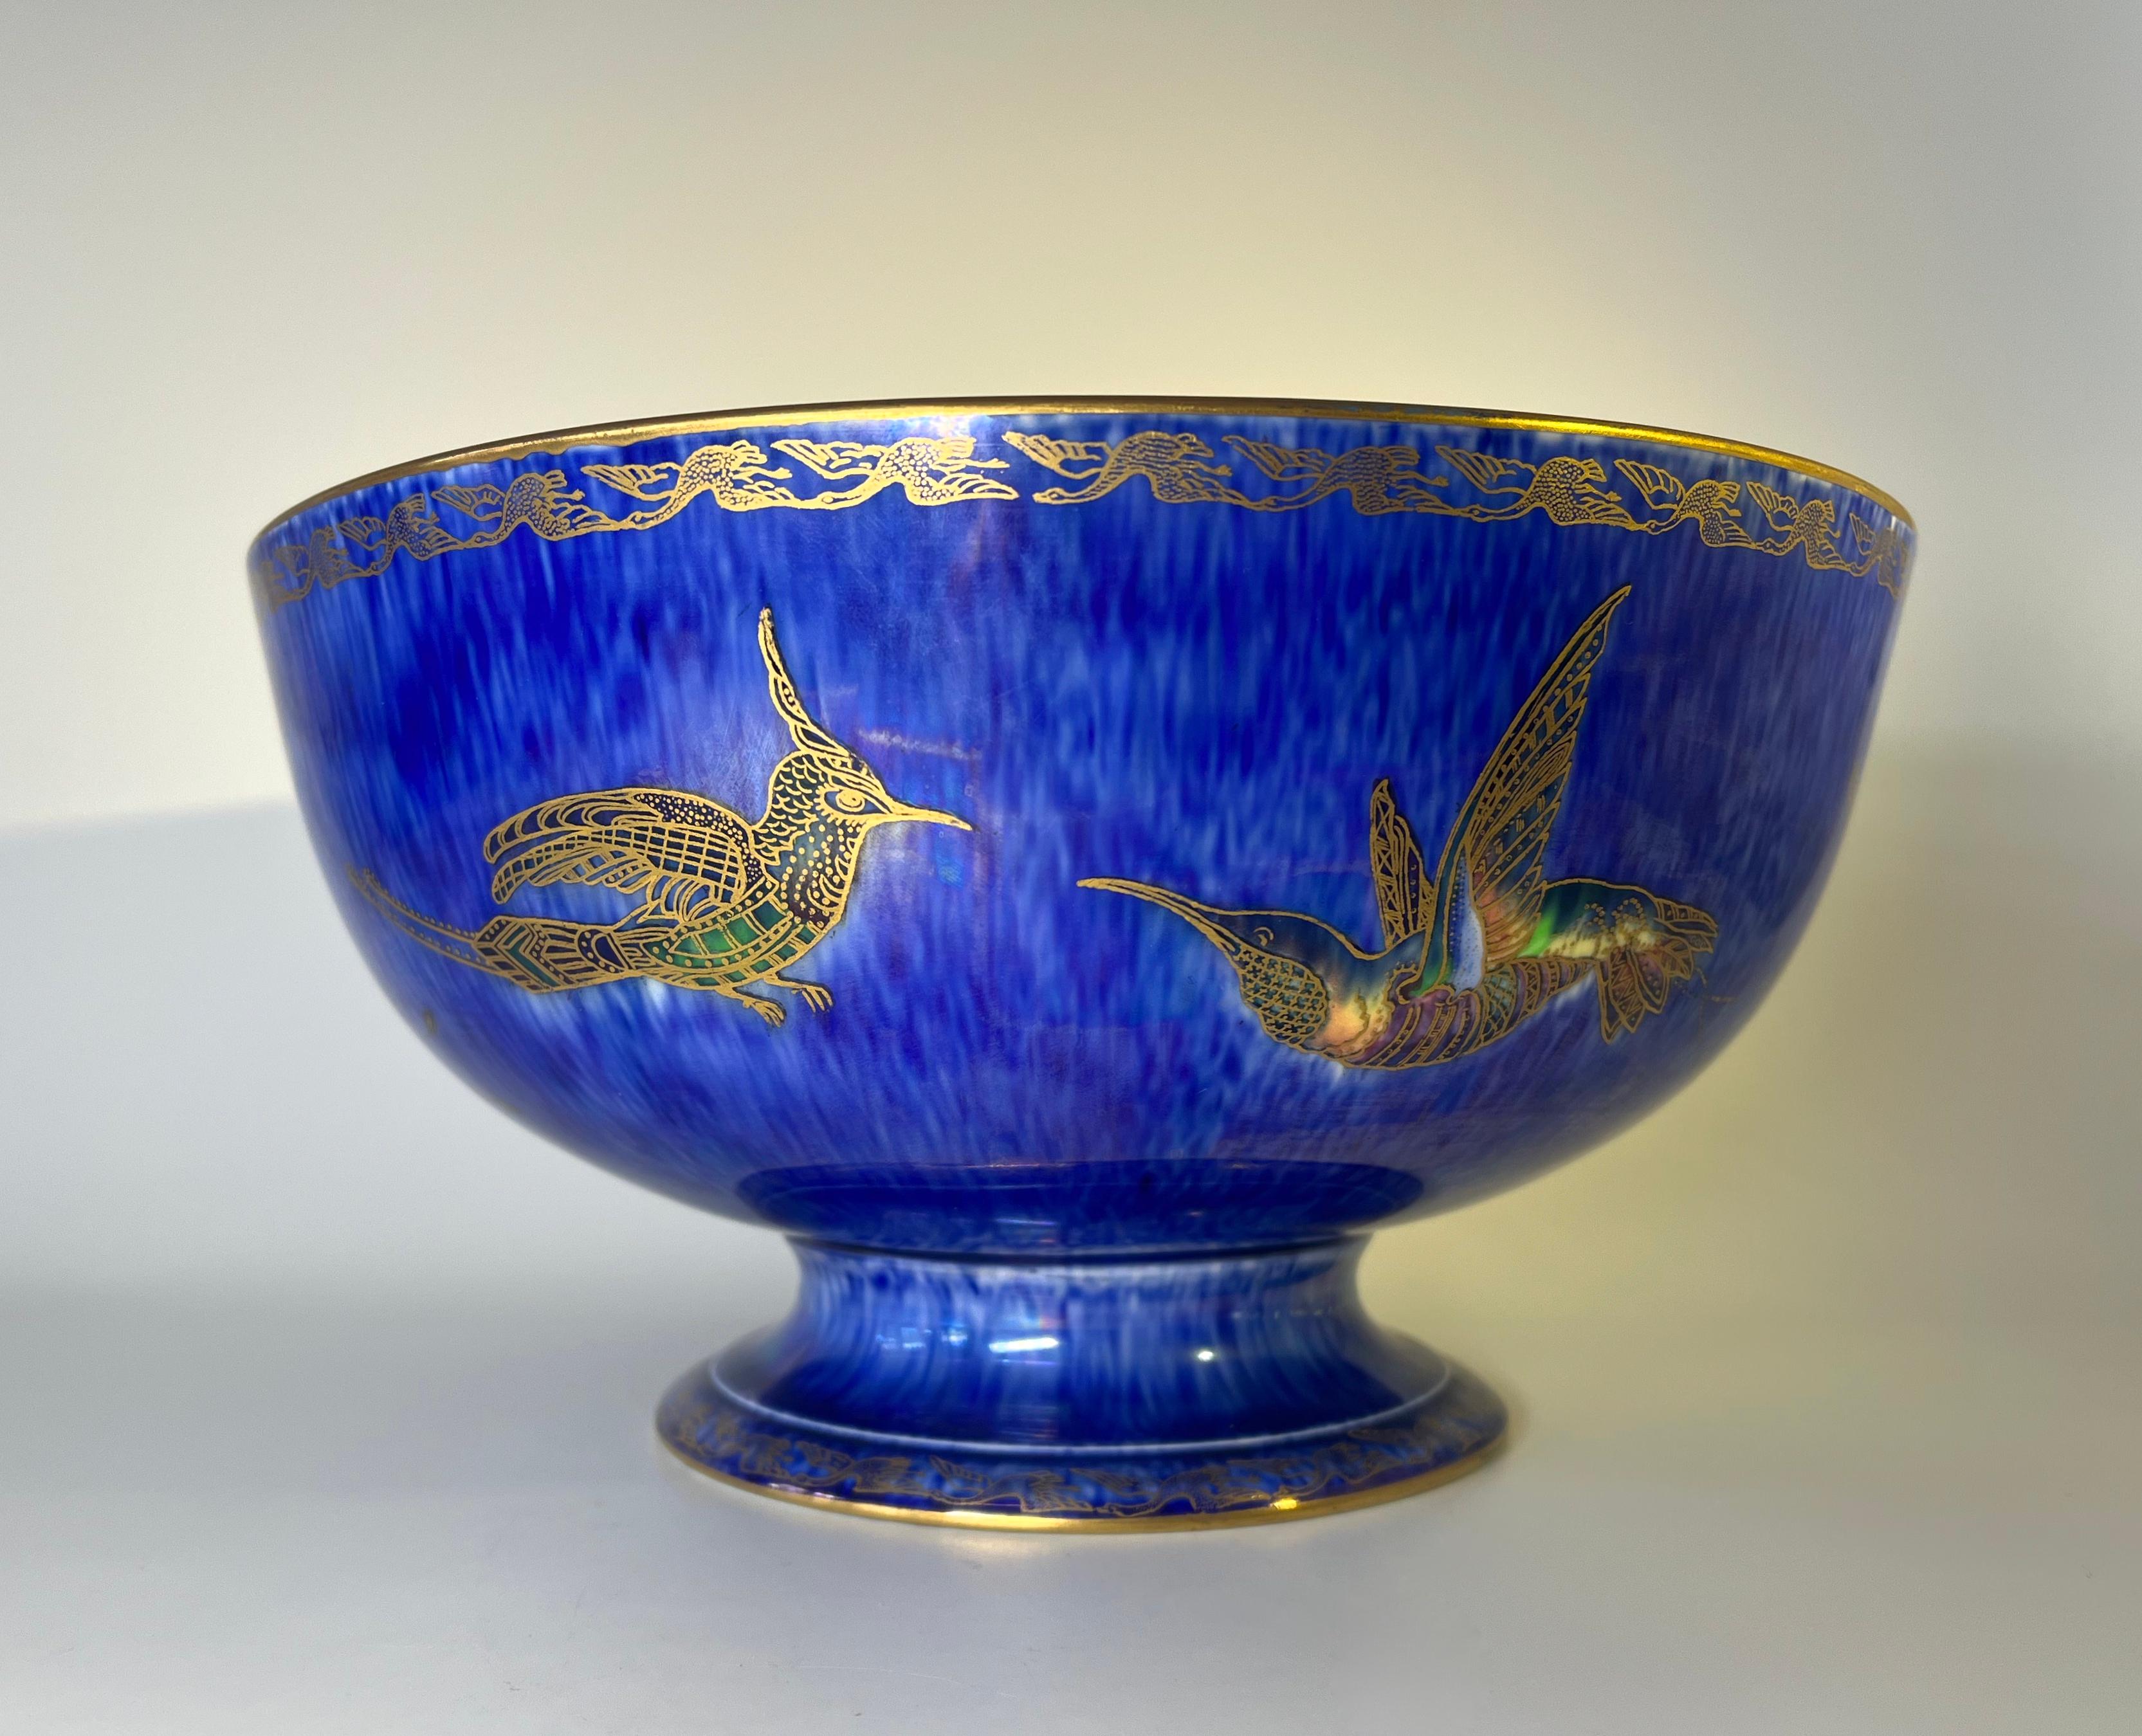 British Monumental Wedgwood Ordinary Lustre Footed Bowl By Daisy Making-Jones For Sale